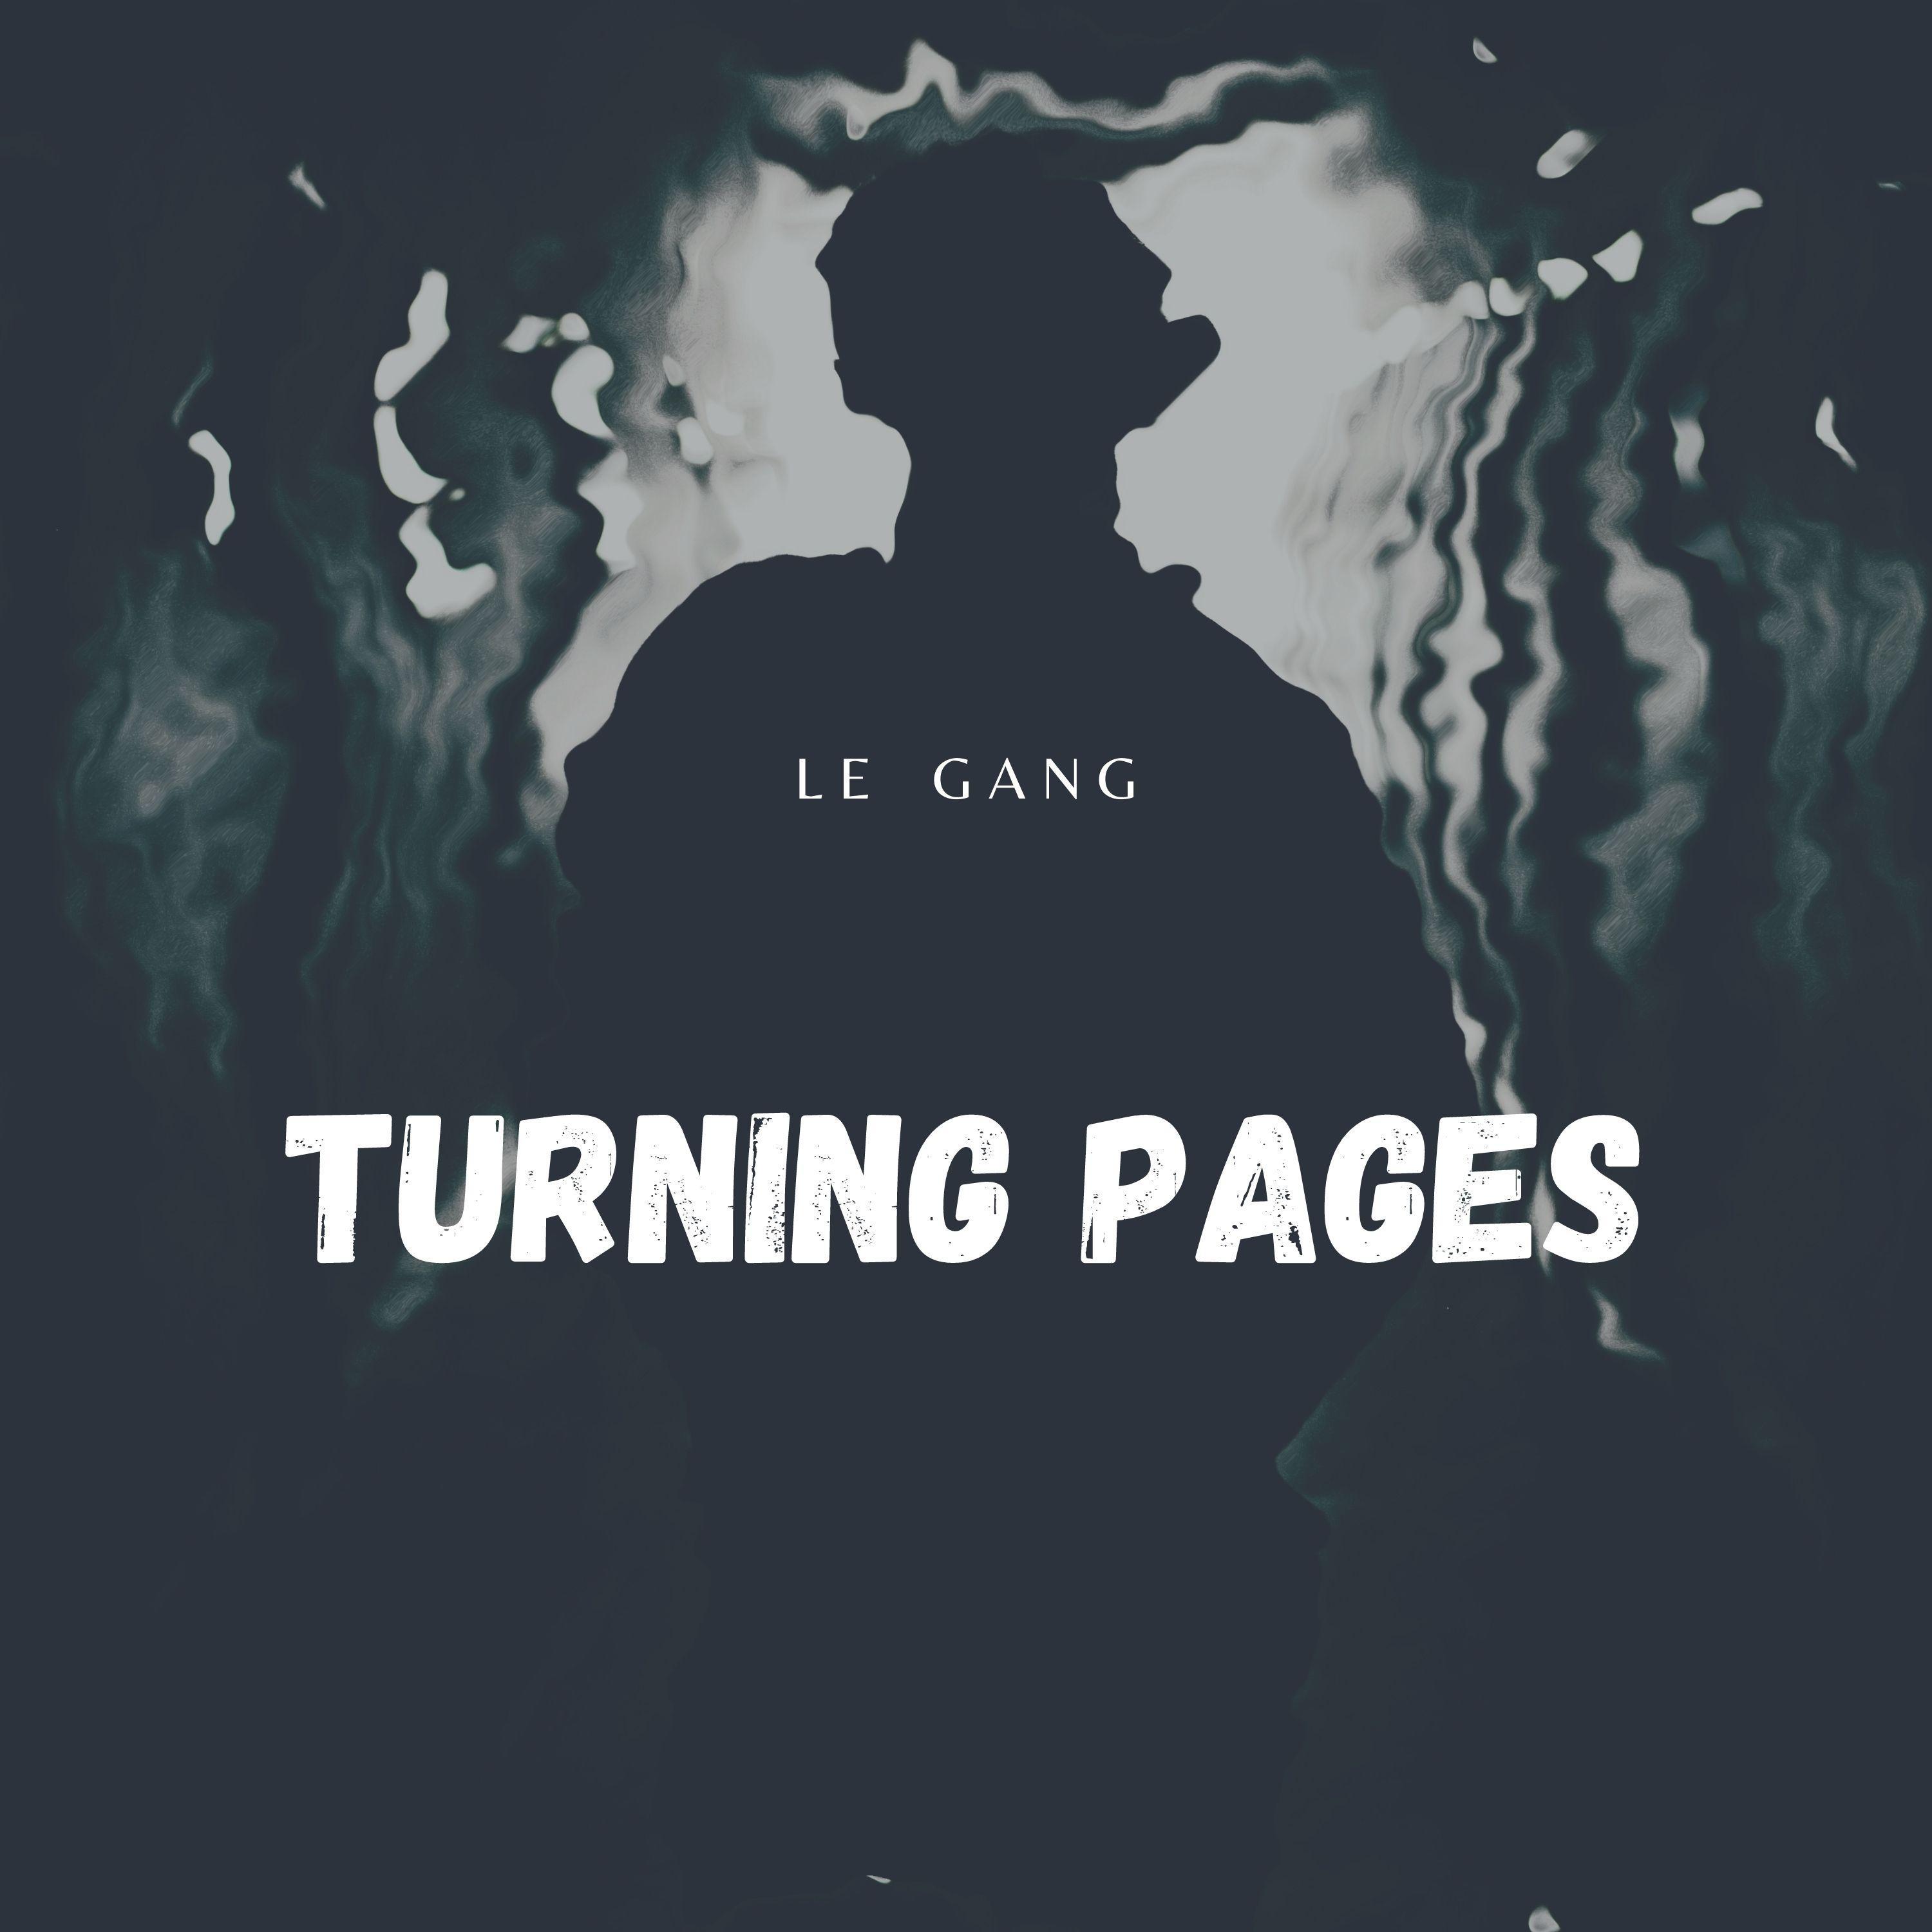 Turning Pages歌词 歌手Le Gang-专辑Turning Pages-单曲《Turning Pages》LRC歌词下载